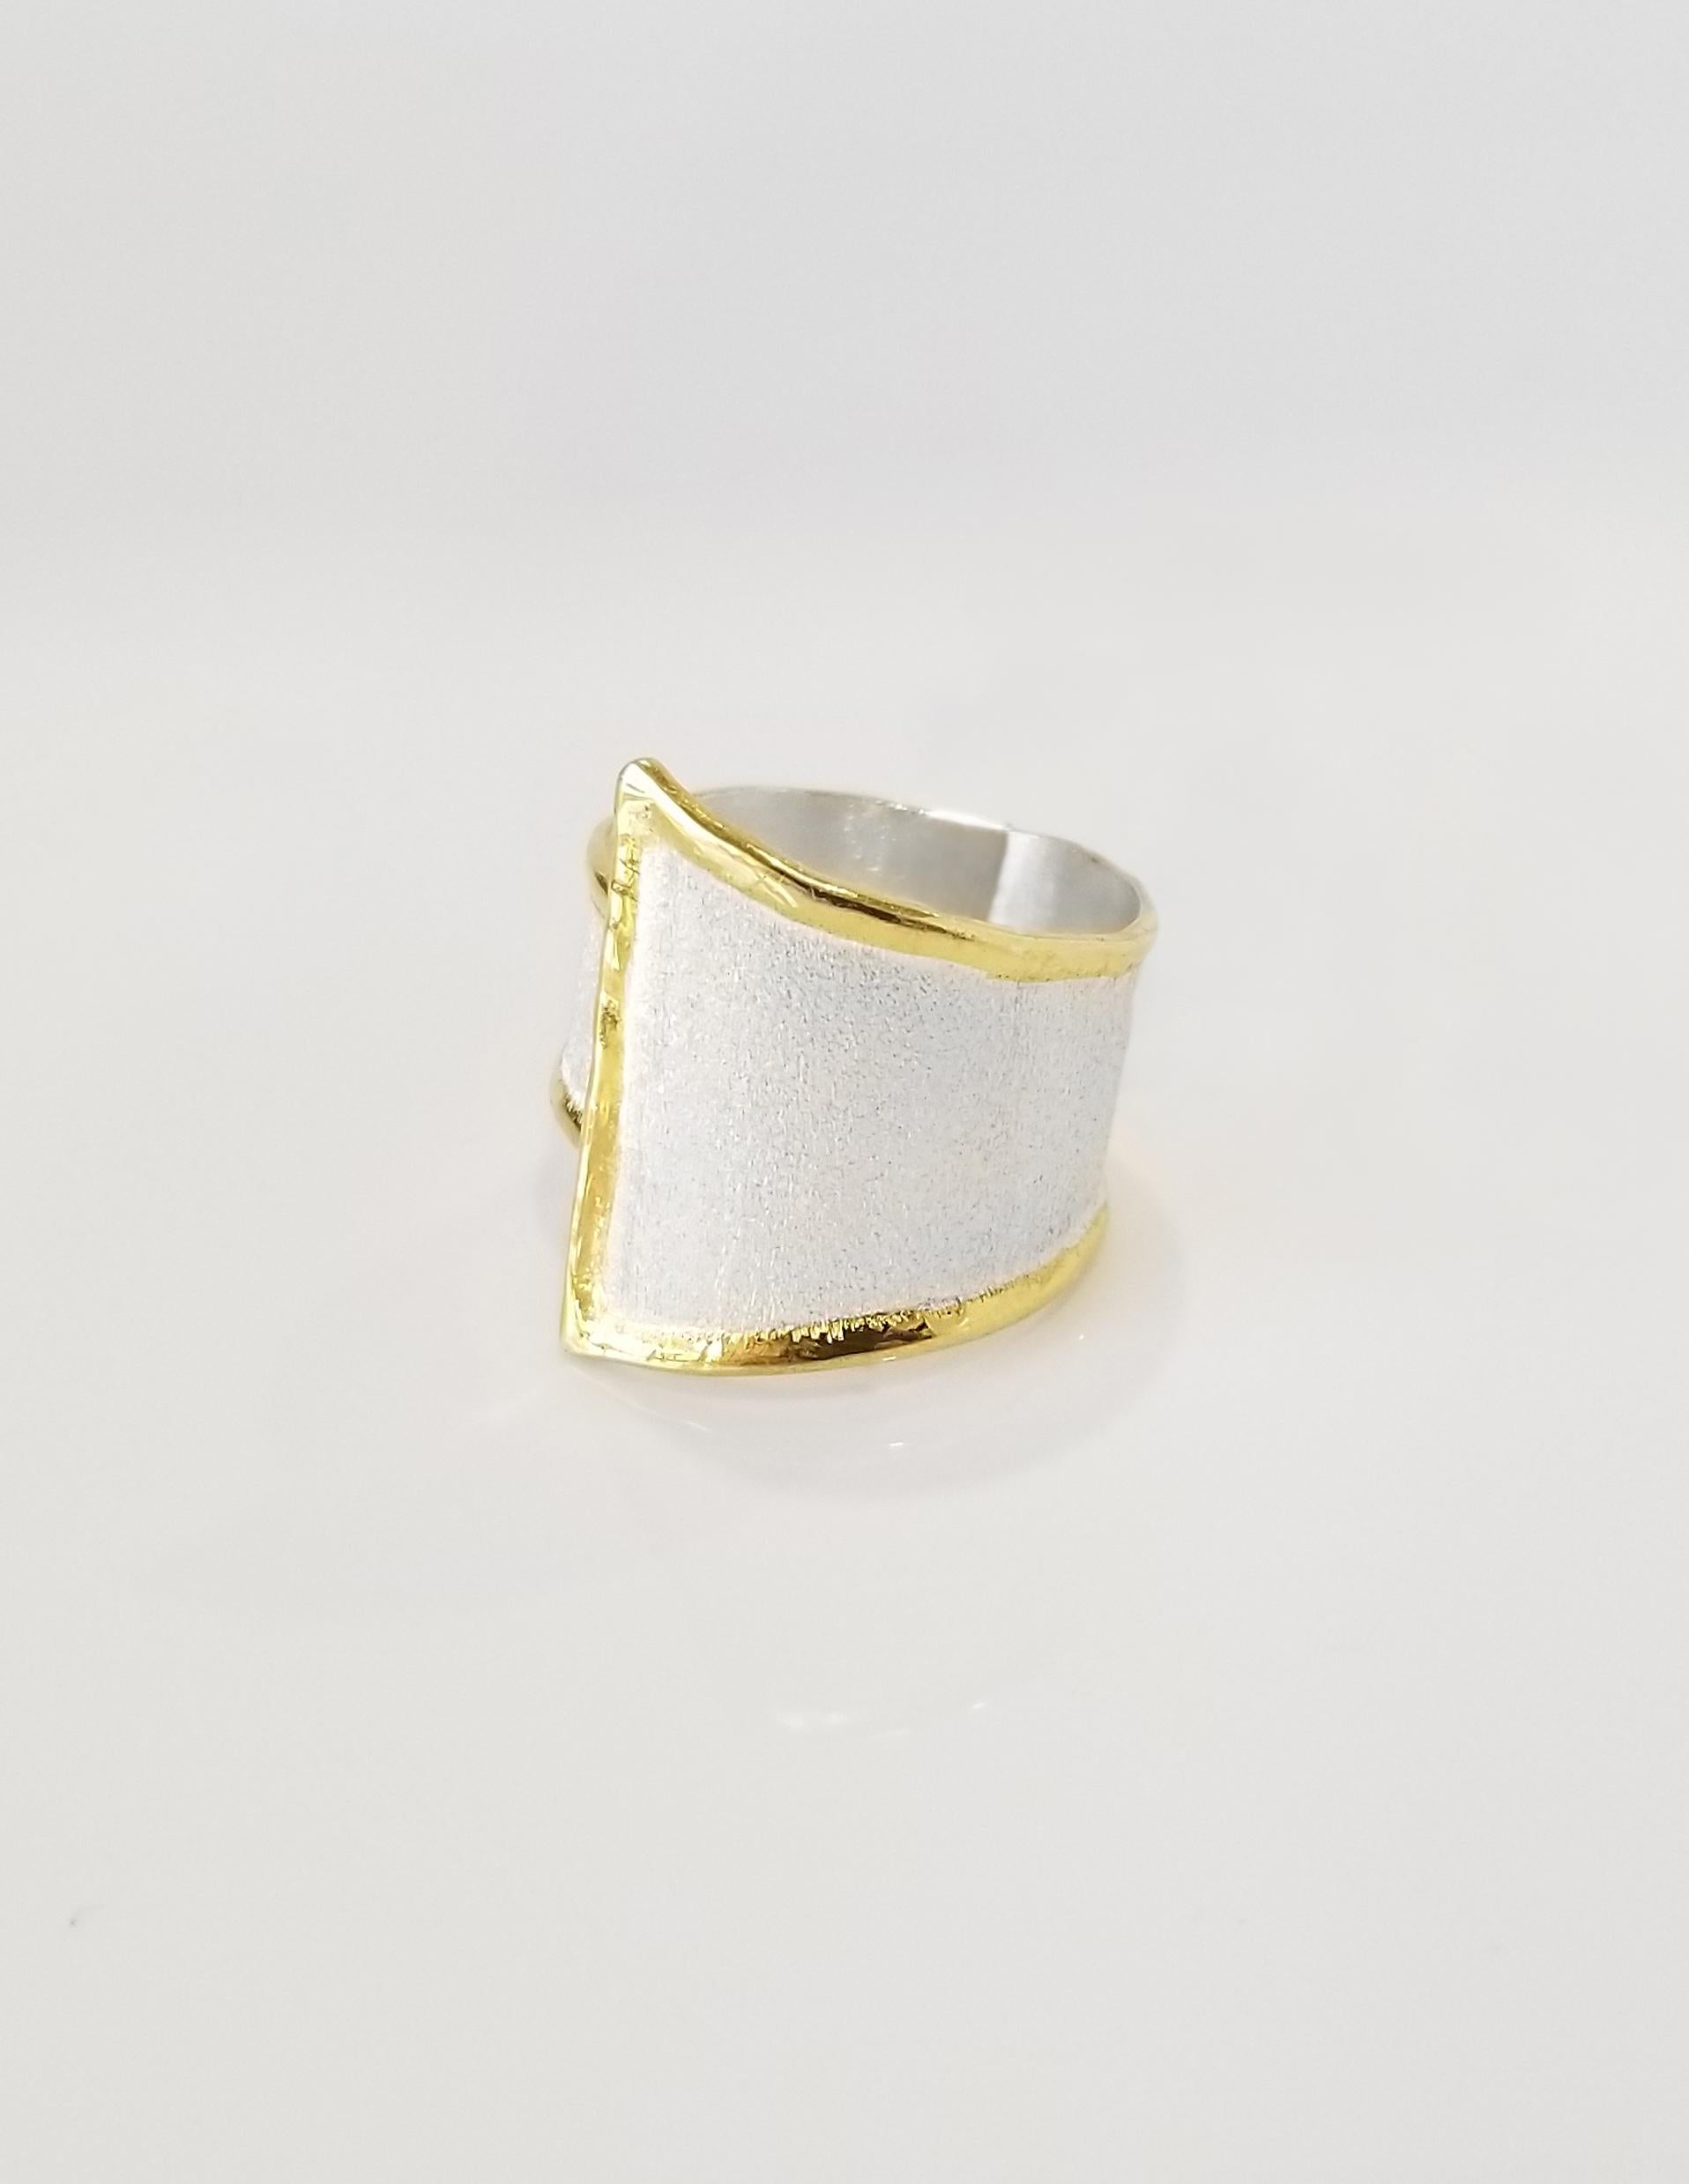 Yianni Creations Midas Collection adjustable Ring from Fine Silver 950 purity with a layover of 24 Karat Yellow Gold features unique techniques of craftsmanship - brushed texture and nature-inspired liquid edges. The core of this beautiful